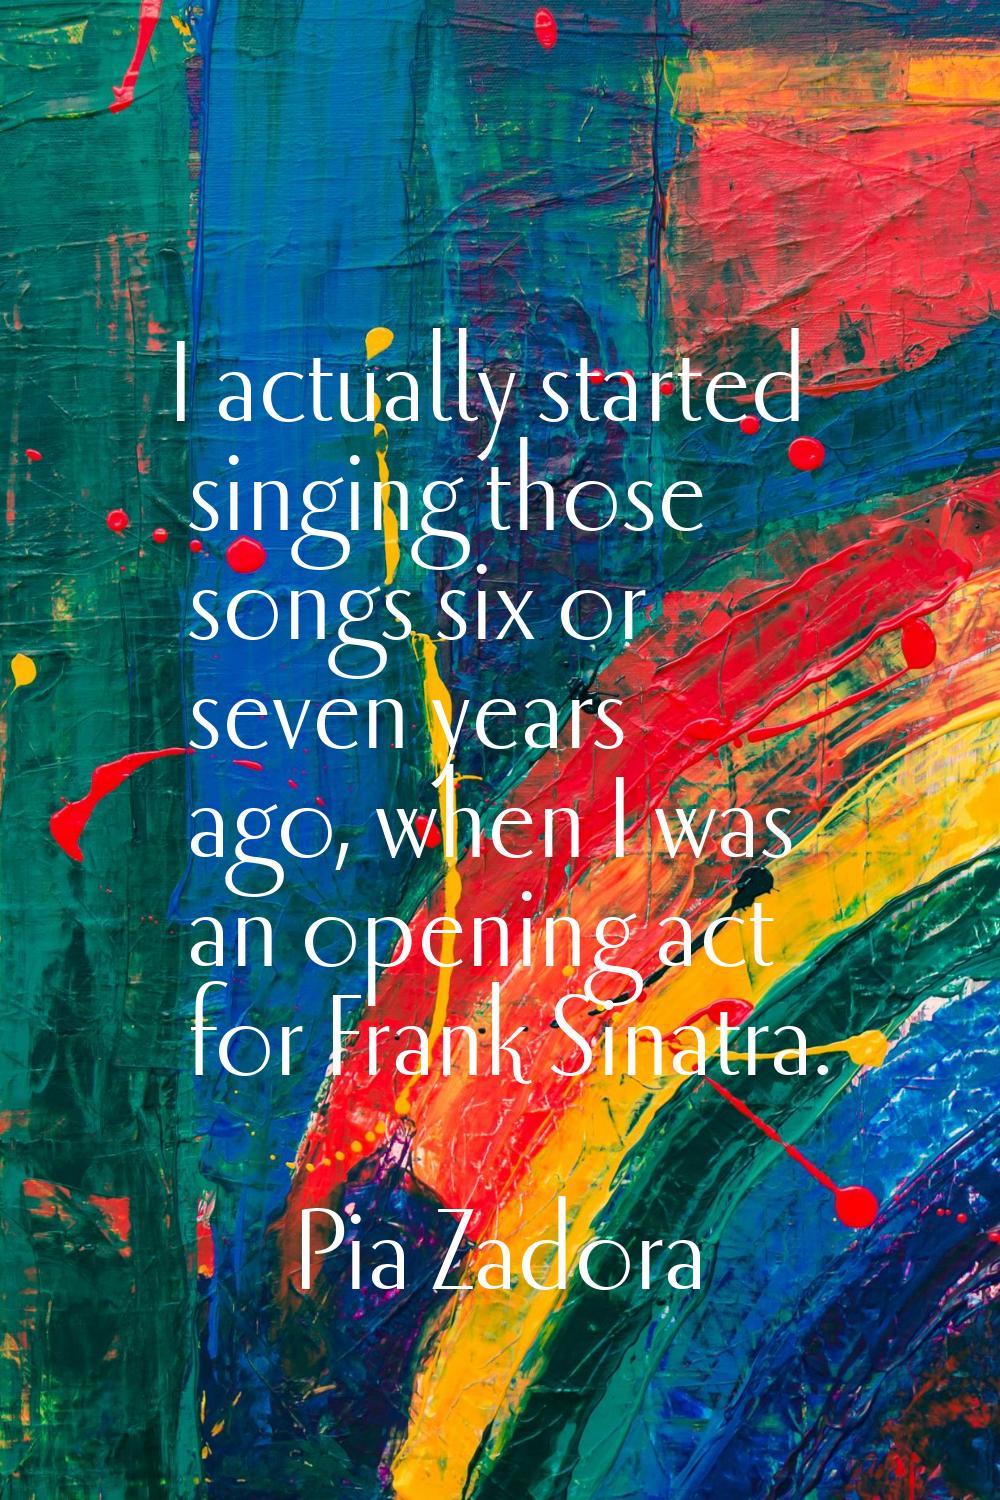 I actually started singing those songs six or seven years ago, when I was an opening act for Frank 